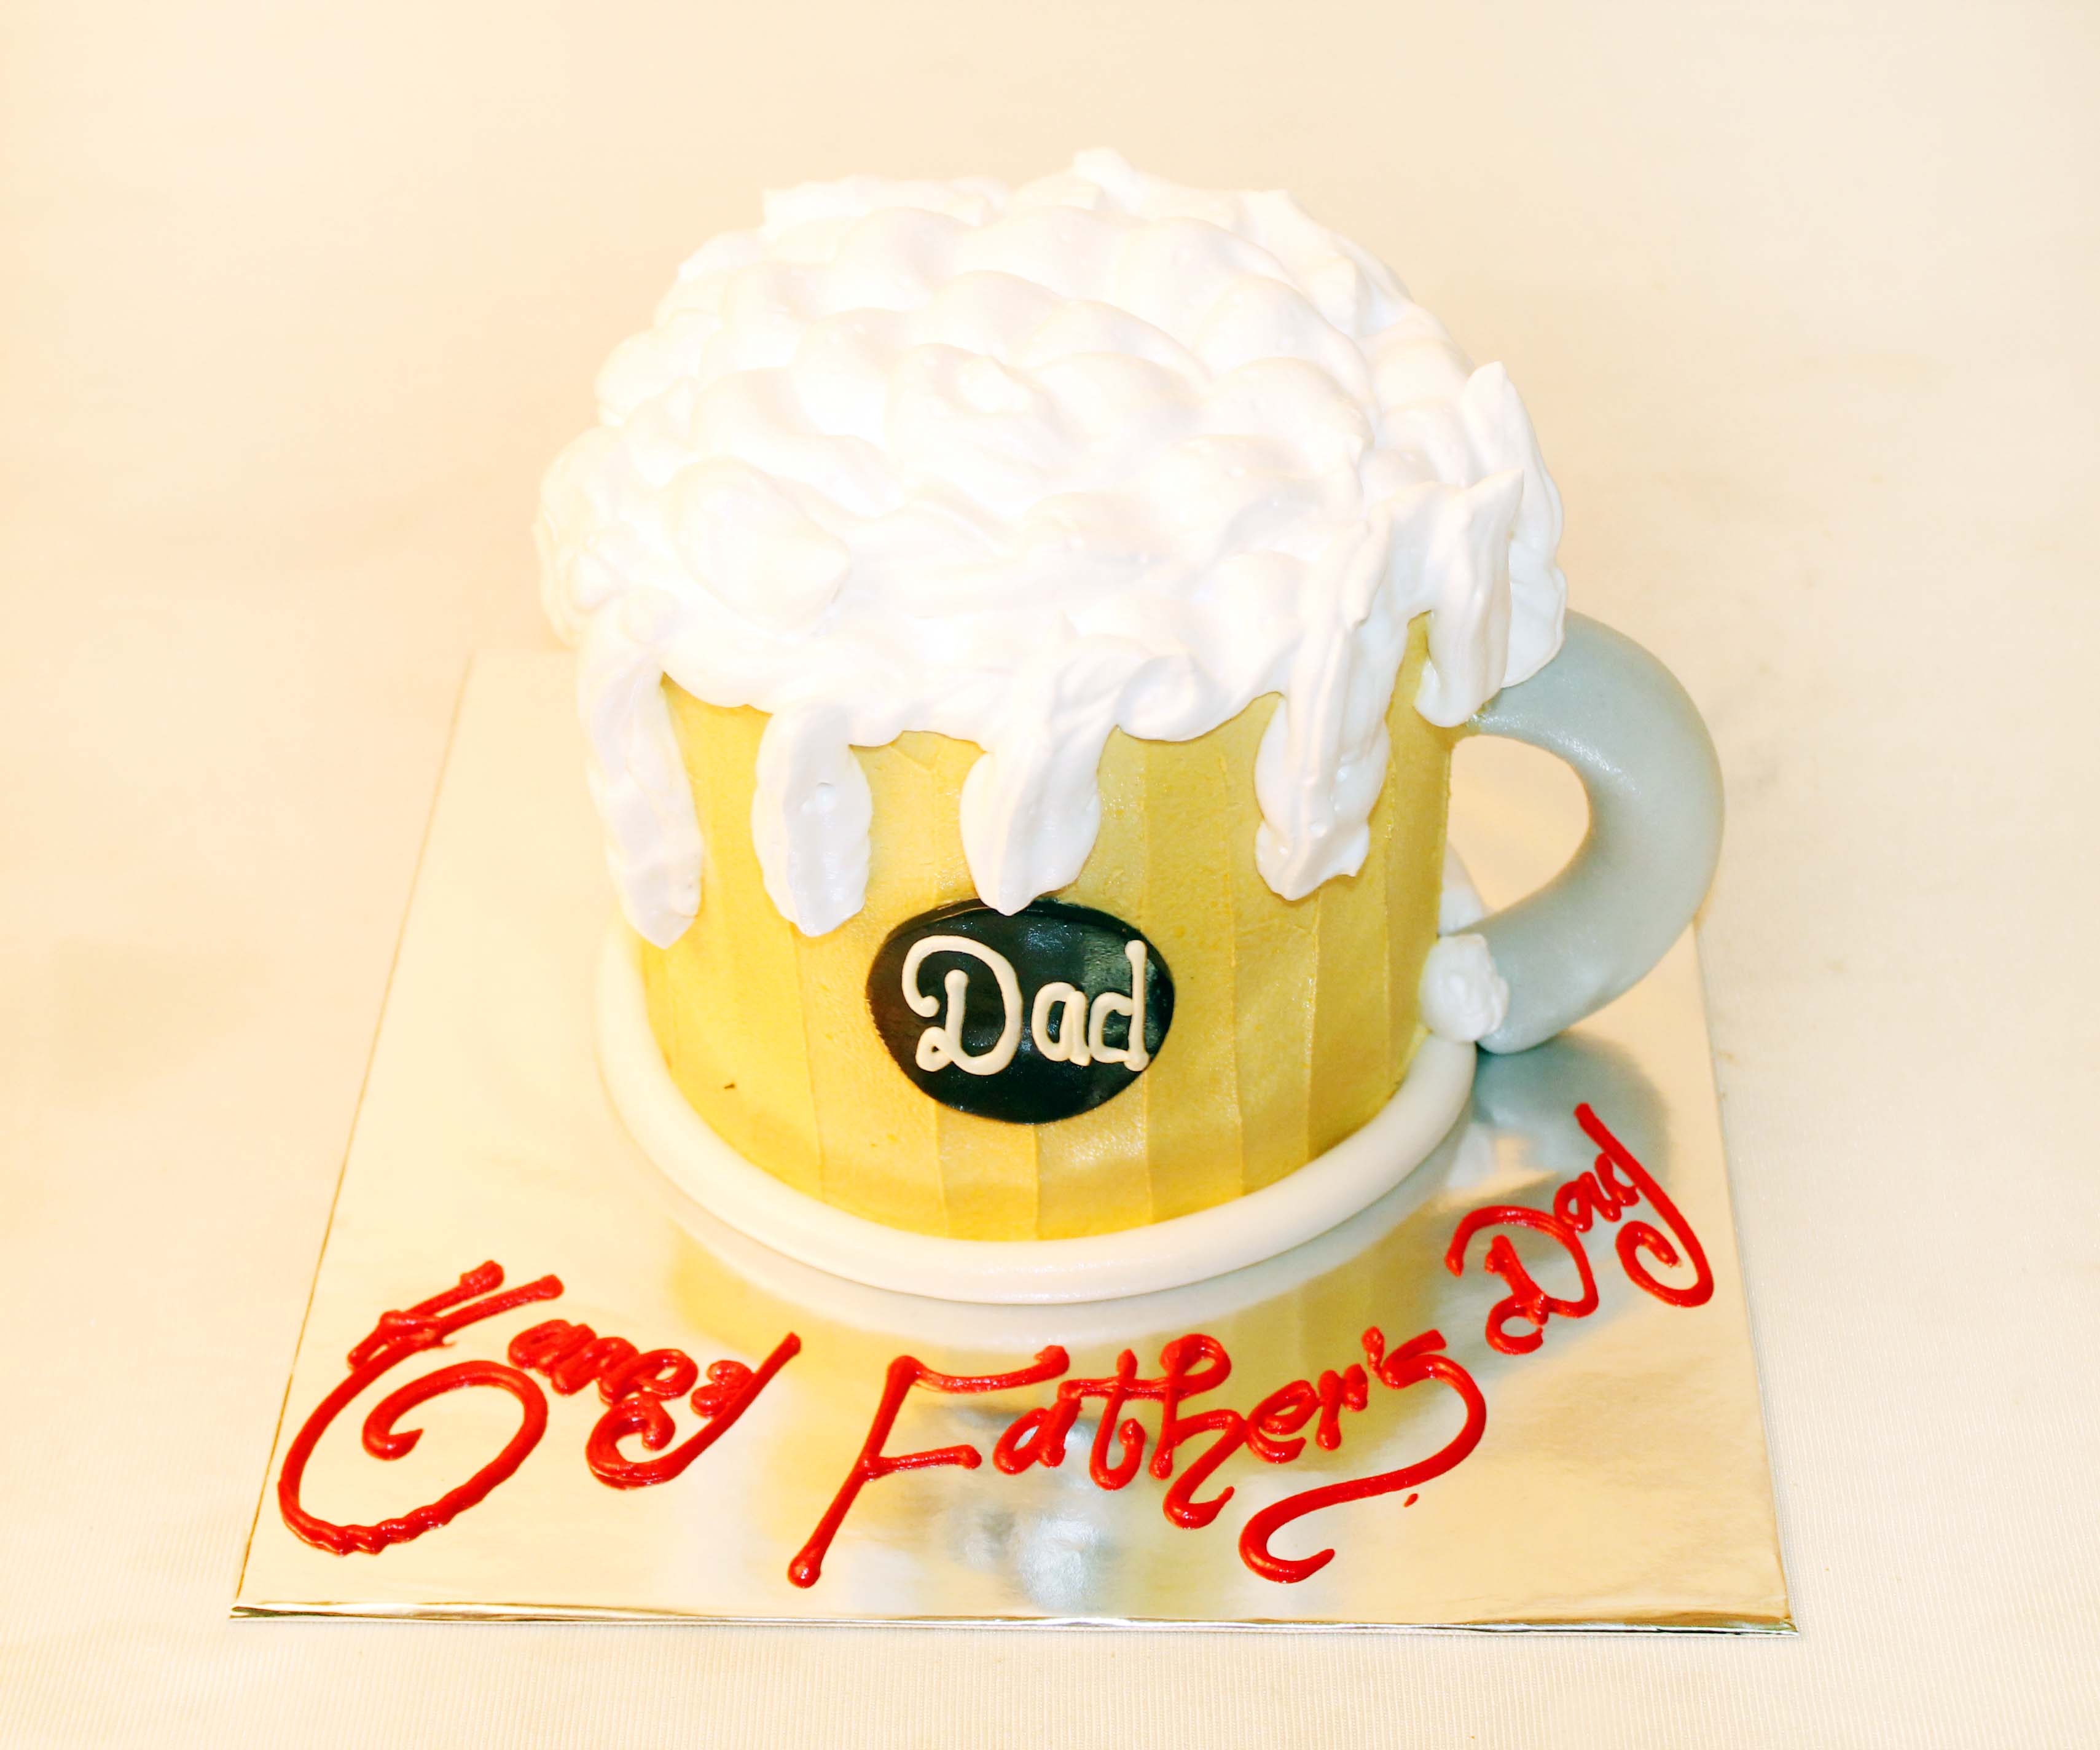 Shirt & Beer Designed Cake for Father's Day